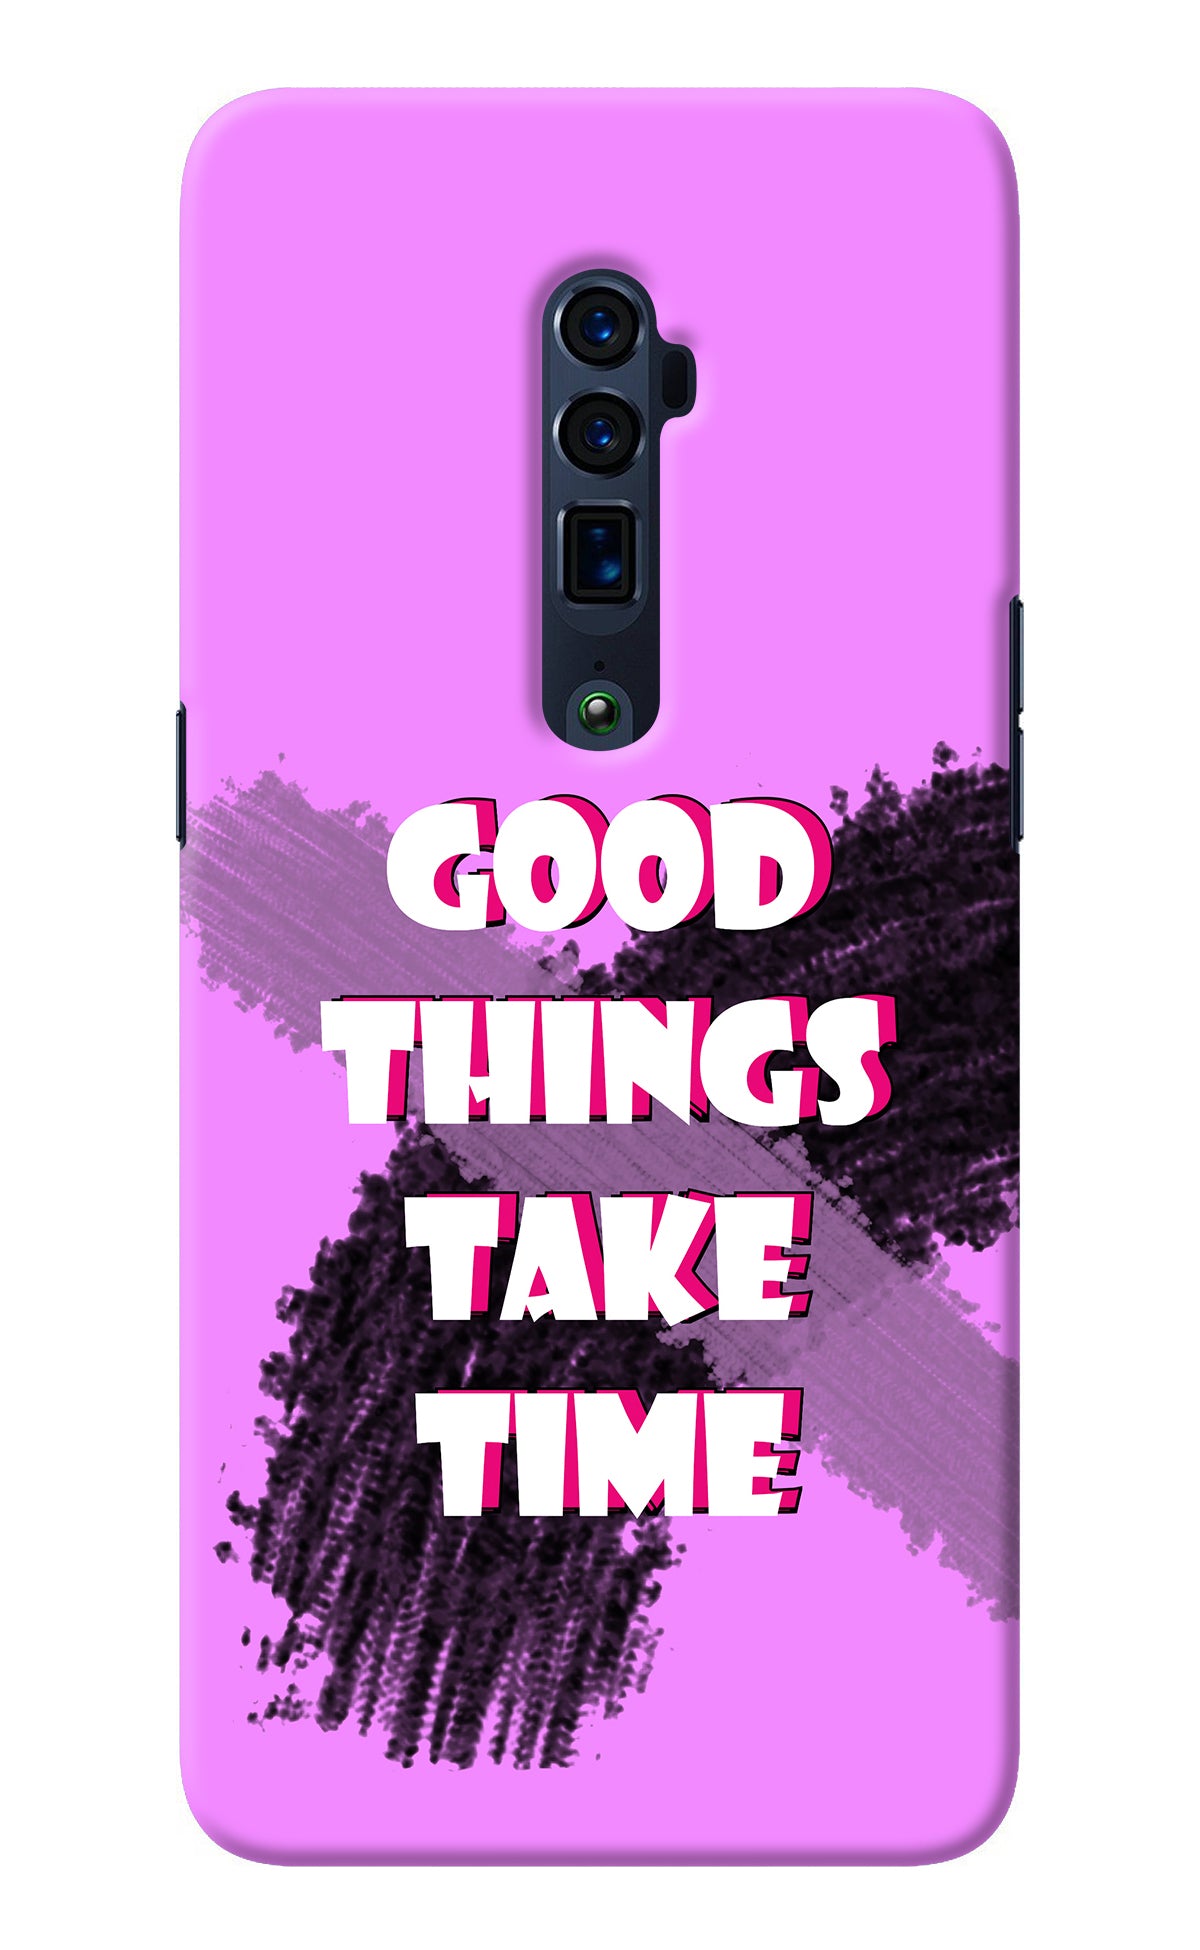 Good Things Take Time Oppo Reno 10x Zoom Back Cover